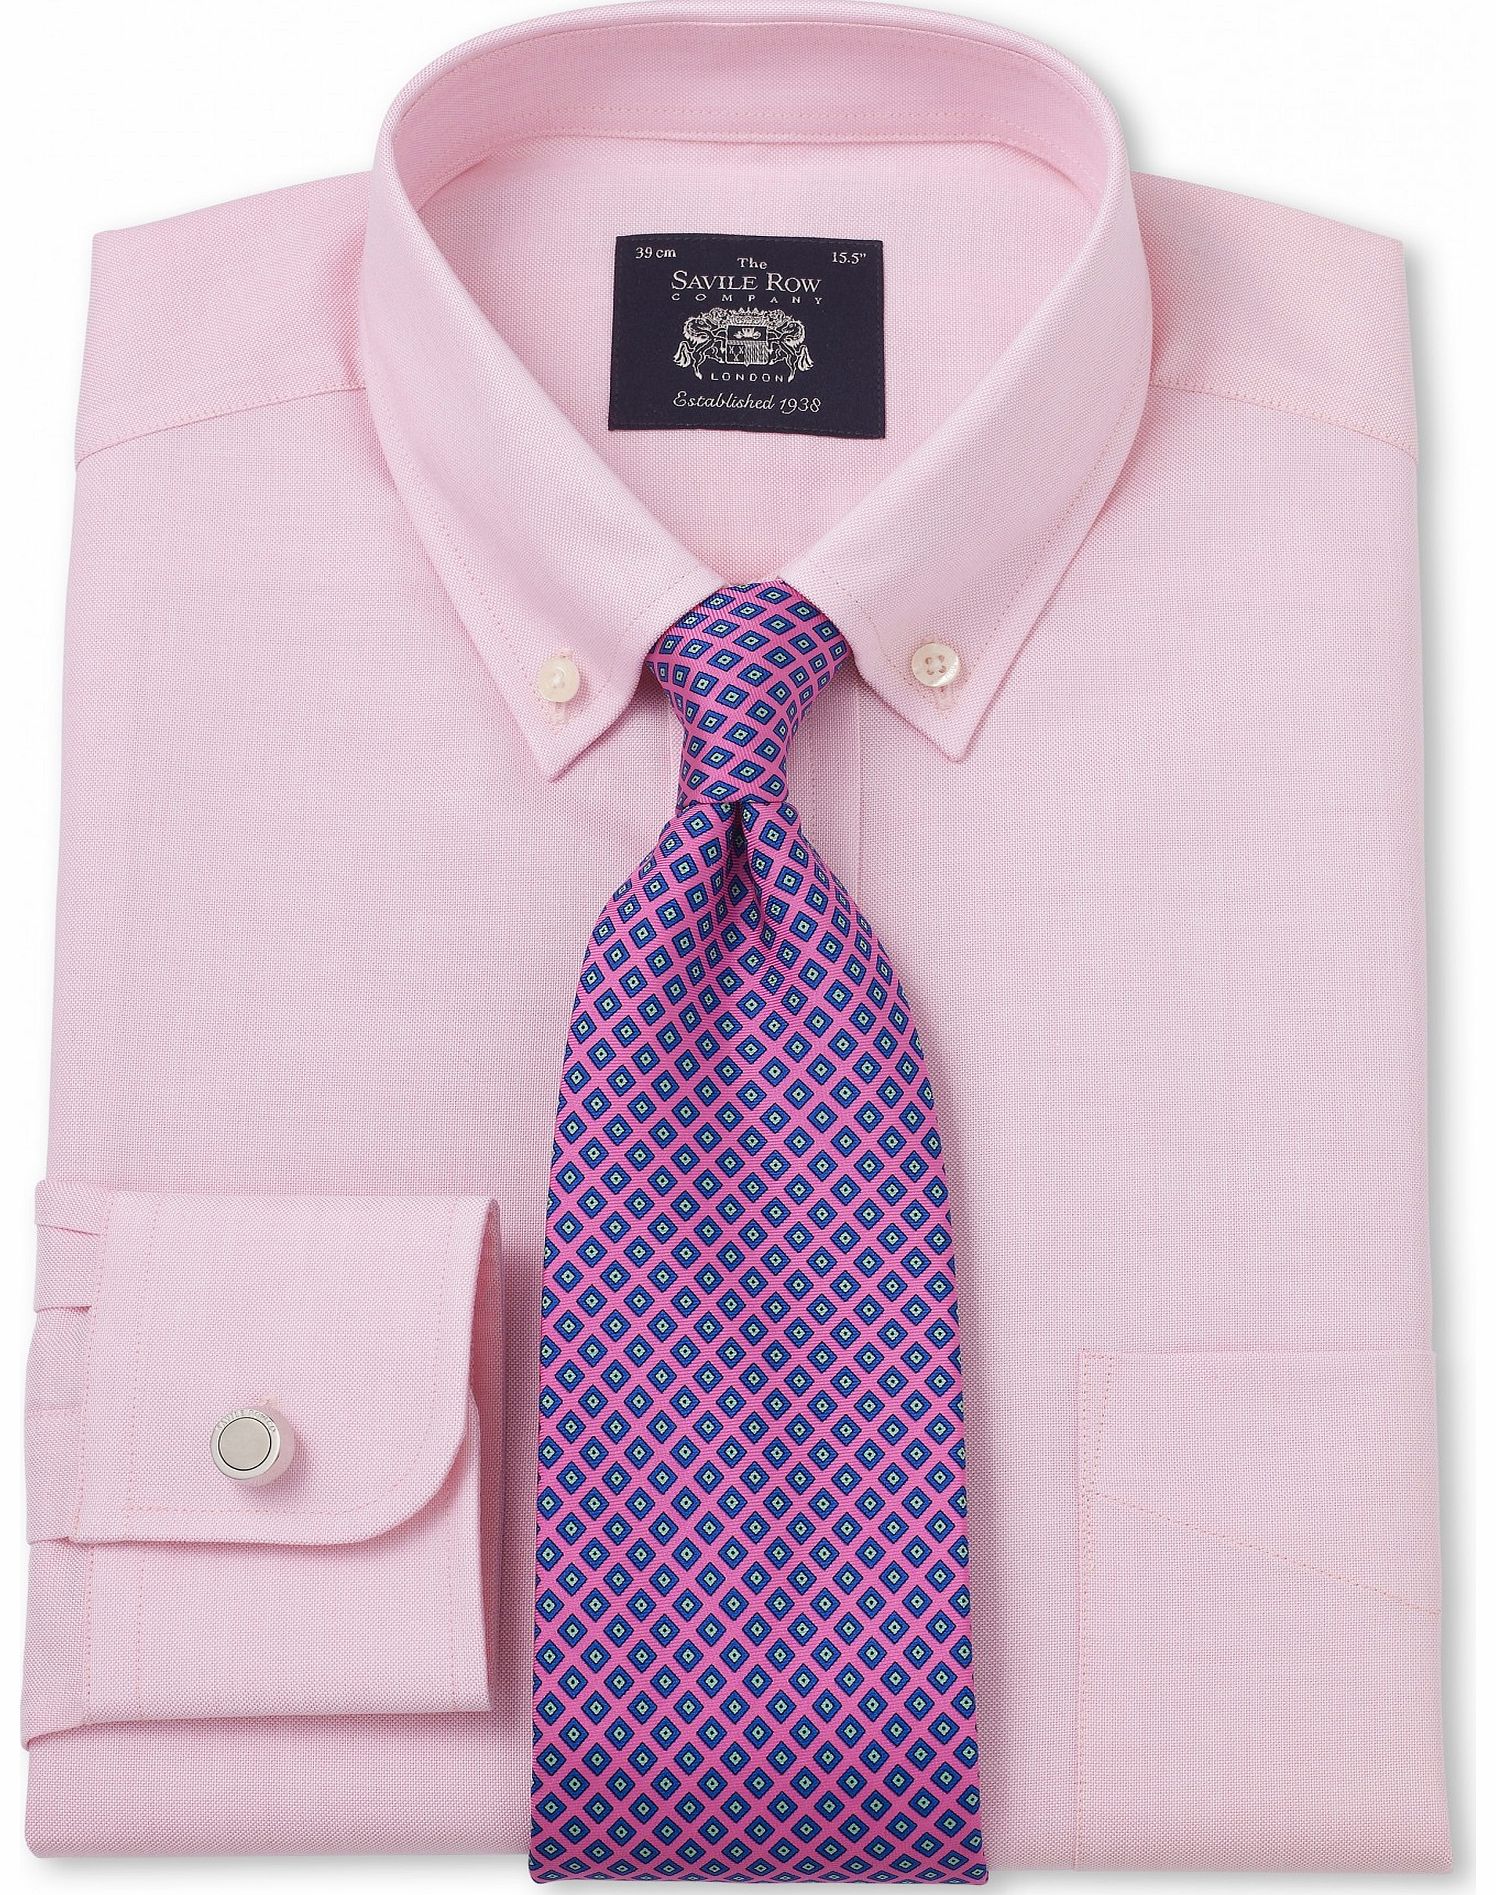 Savile Row Company Pink Pinpoint Classic Fit Shirt 15 1/2``